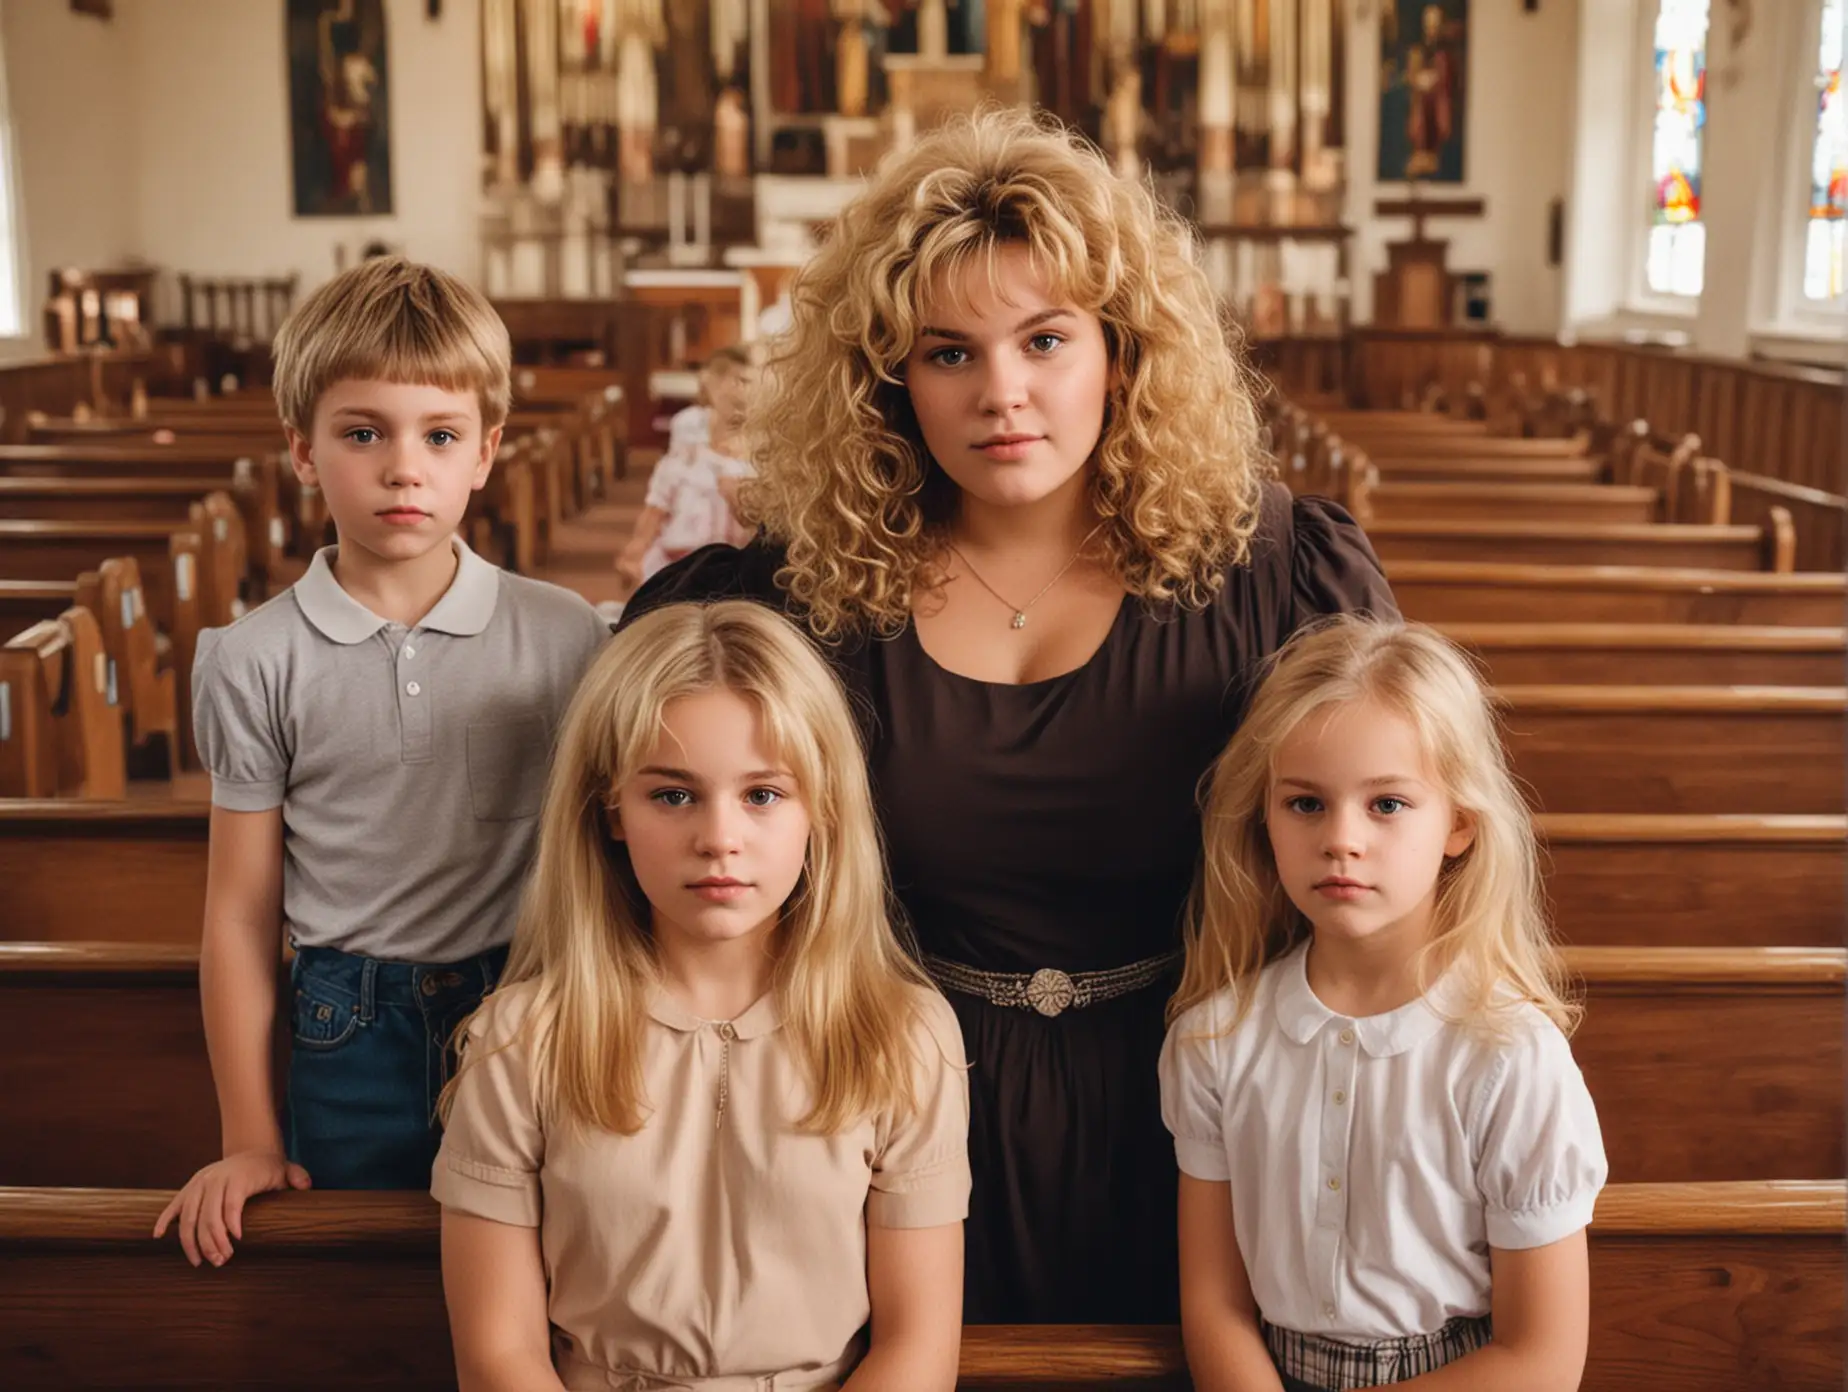 Church Scene Candid Snapshot of Mother and Children 80s Style